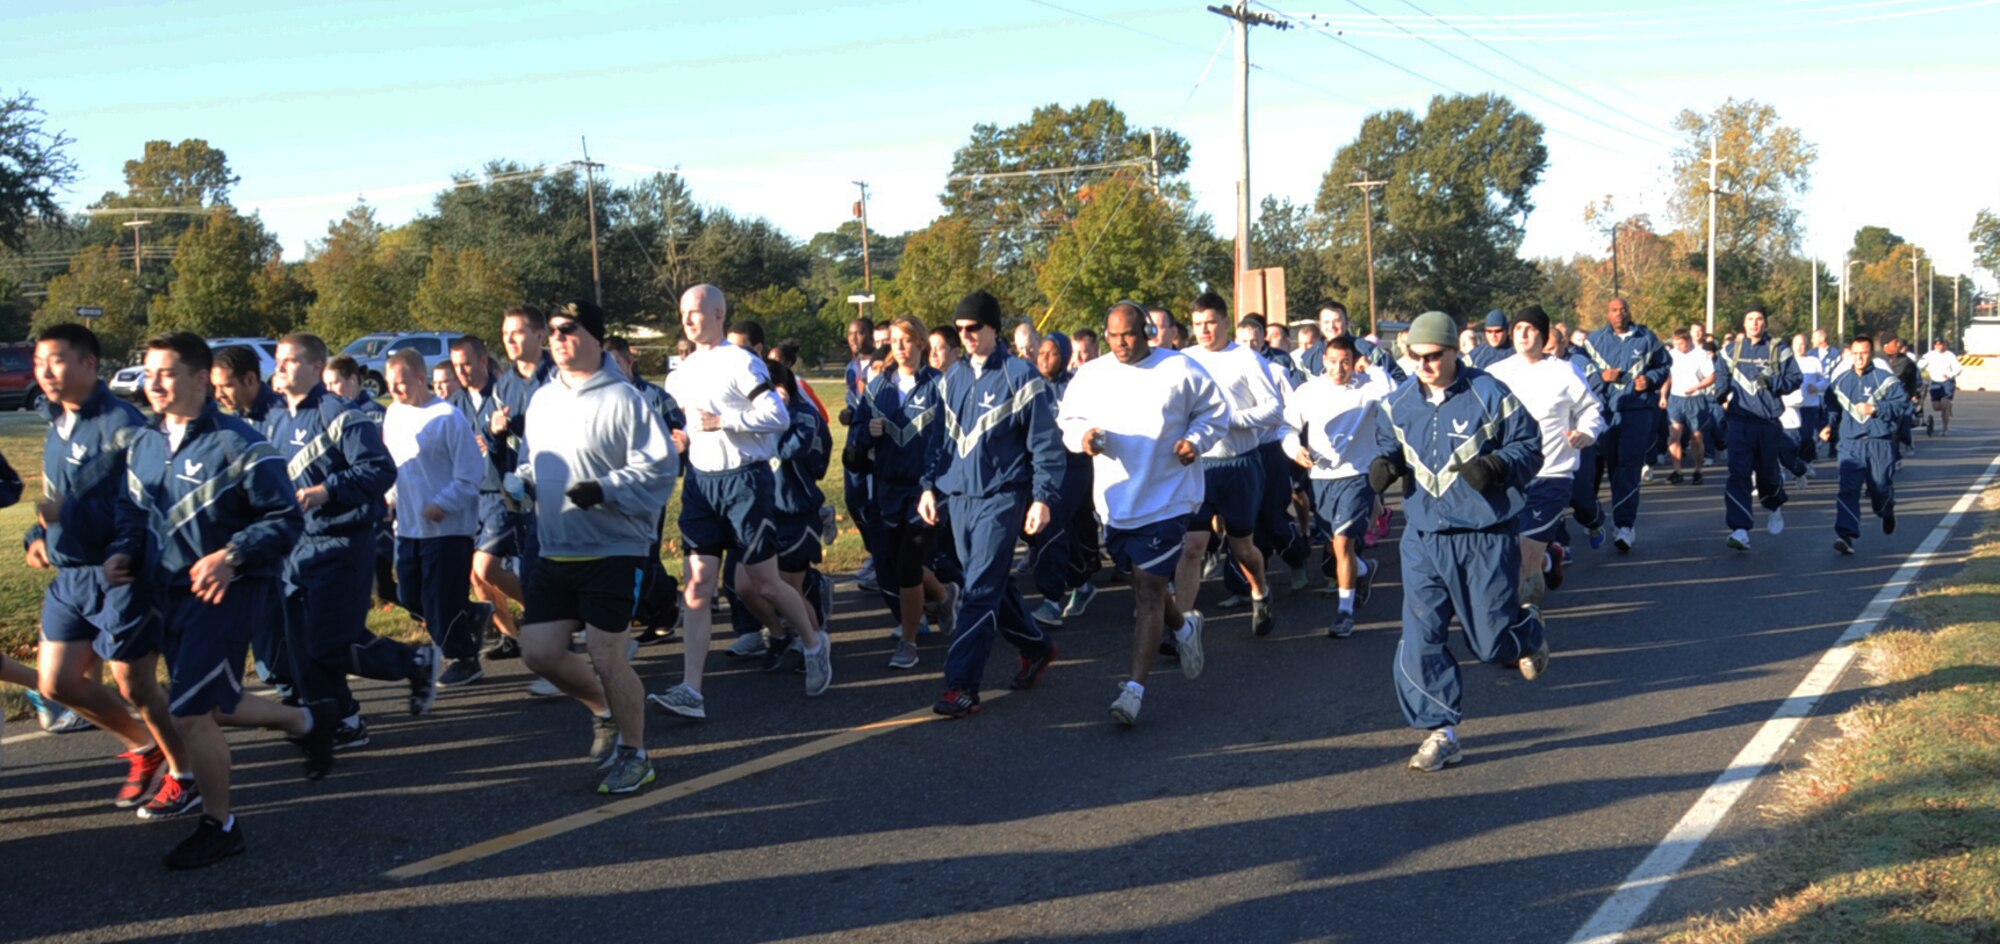 Team Barksdale participates in a 5K Fun Run as part of Sports Day 2012 on Barksdale Air Force Base, La., Nov. 16. Sports Day consists of various team events including dodgeball, basketball, soccer, tug-of-war, volleyball, a homerun derby, flag football and racquetball. This day was designed to improve team work and help increase the awareness of fitness, sports programs and boost morale. (U.S. Air Force photo/Senior Airman Sean Martin)(RELEASED) 